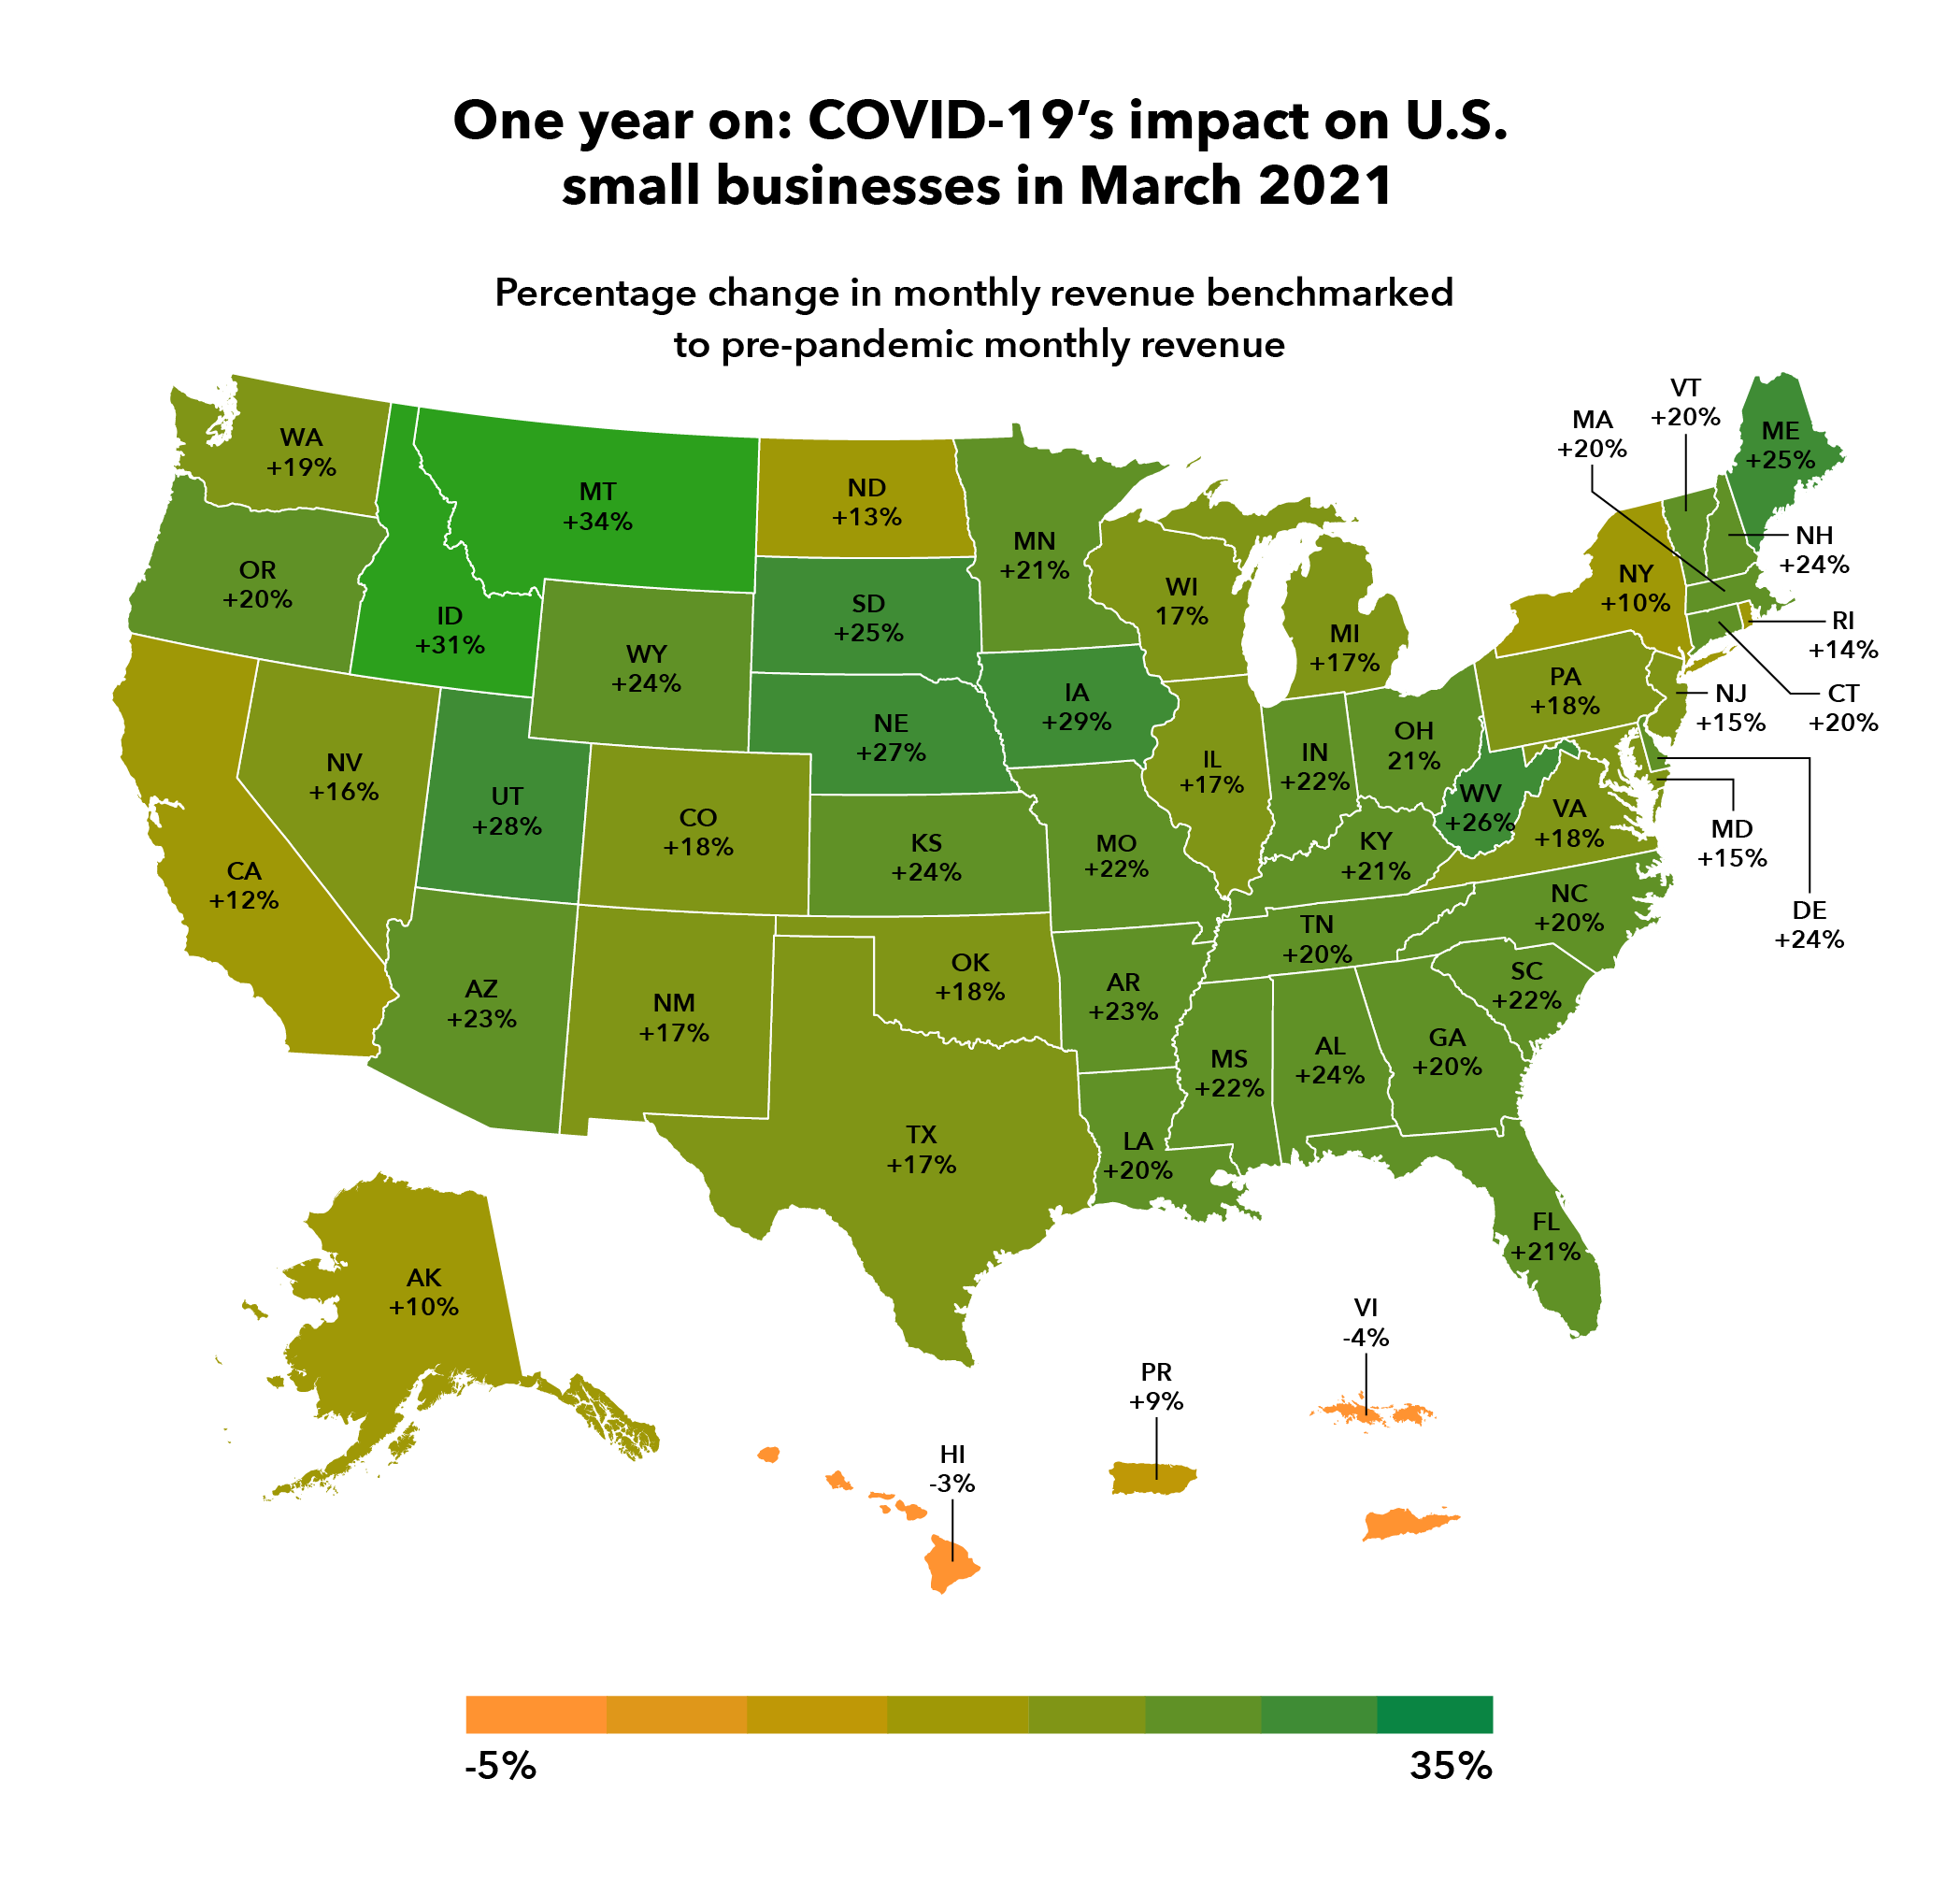 One year on: COVID-19's impact on US small business in 2021